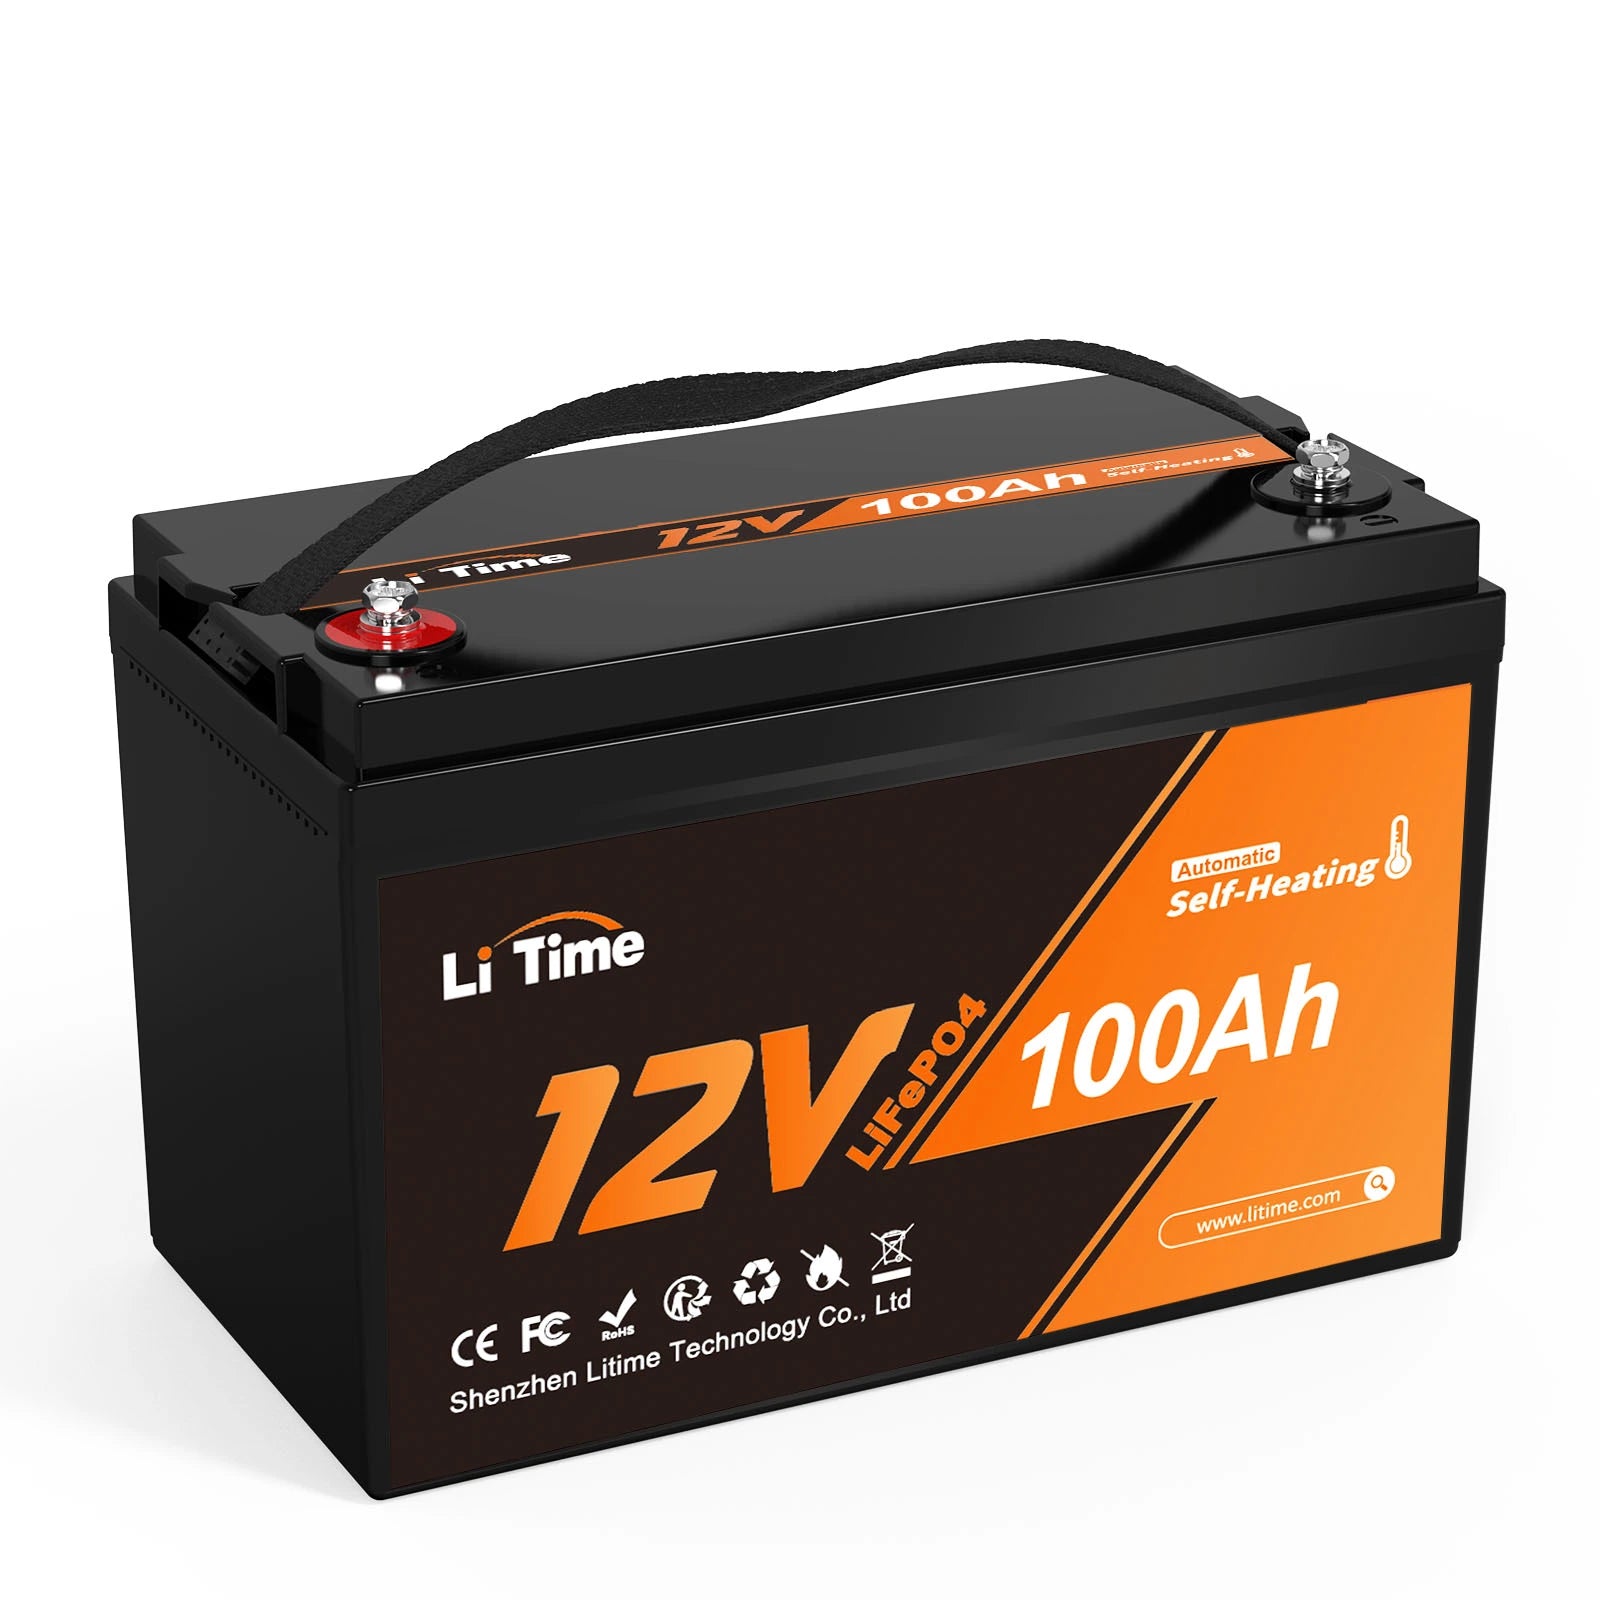 LiTime 12V 100Ah LiFePO4 Batterie mit Selbstheizungs-Upgrade